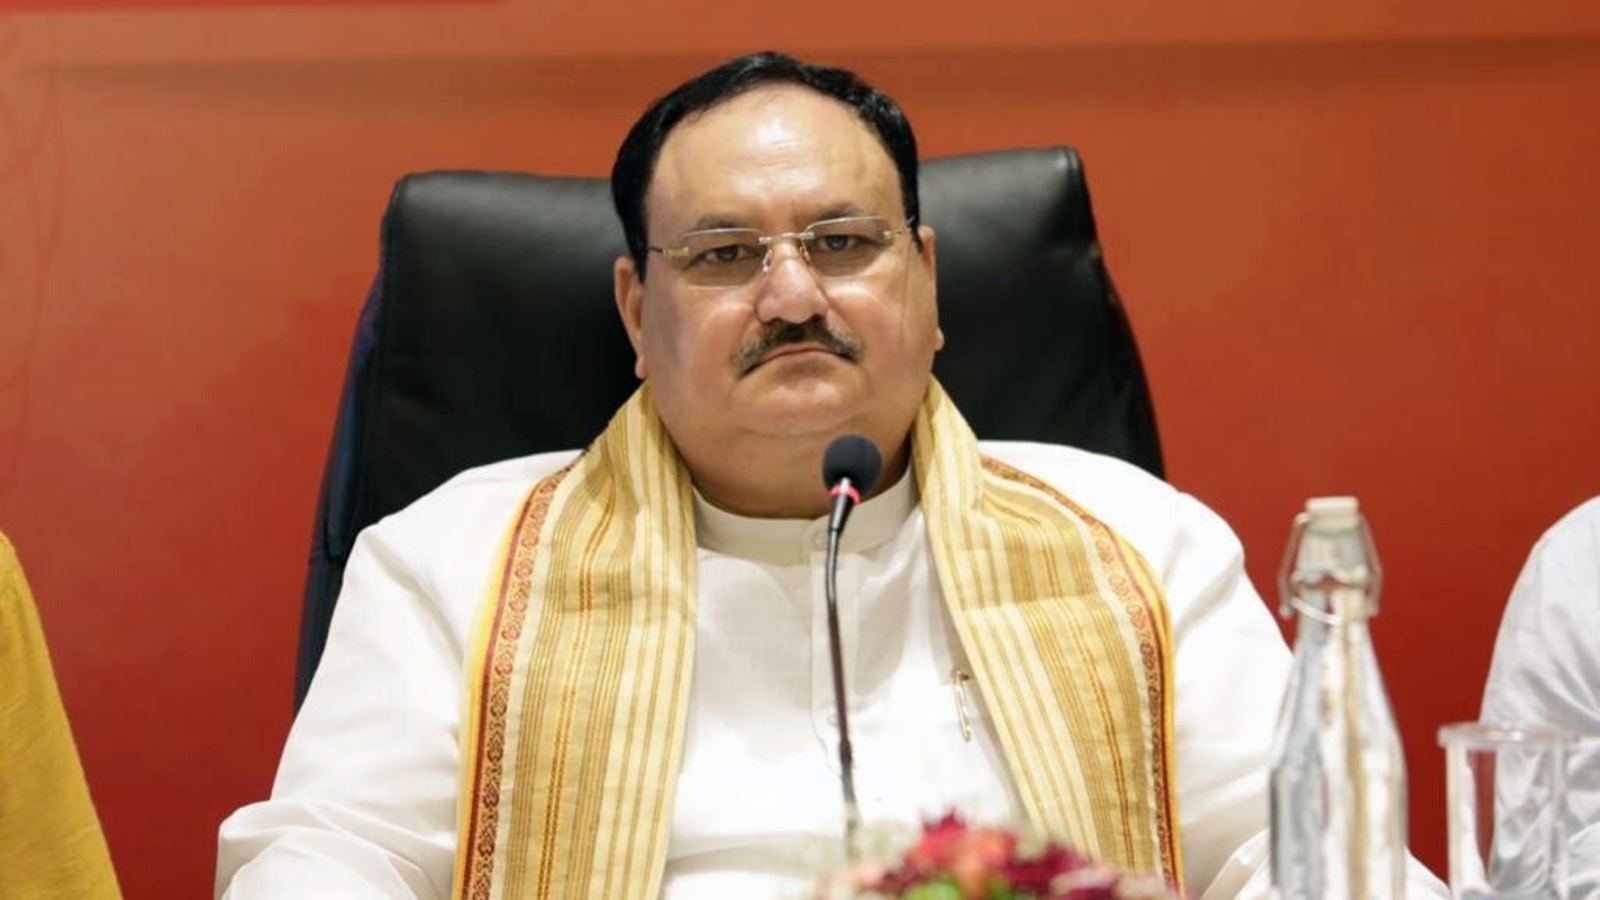 Bjp Chief Jp Nadda To Begin 2 Day Up Visit Today Meet State Leaders Ministers Hindustan Times 8675